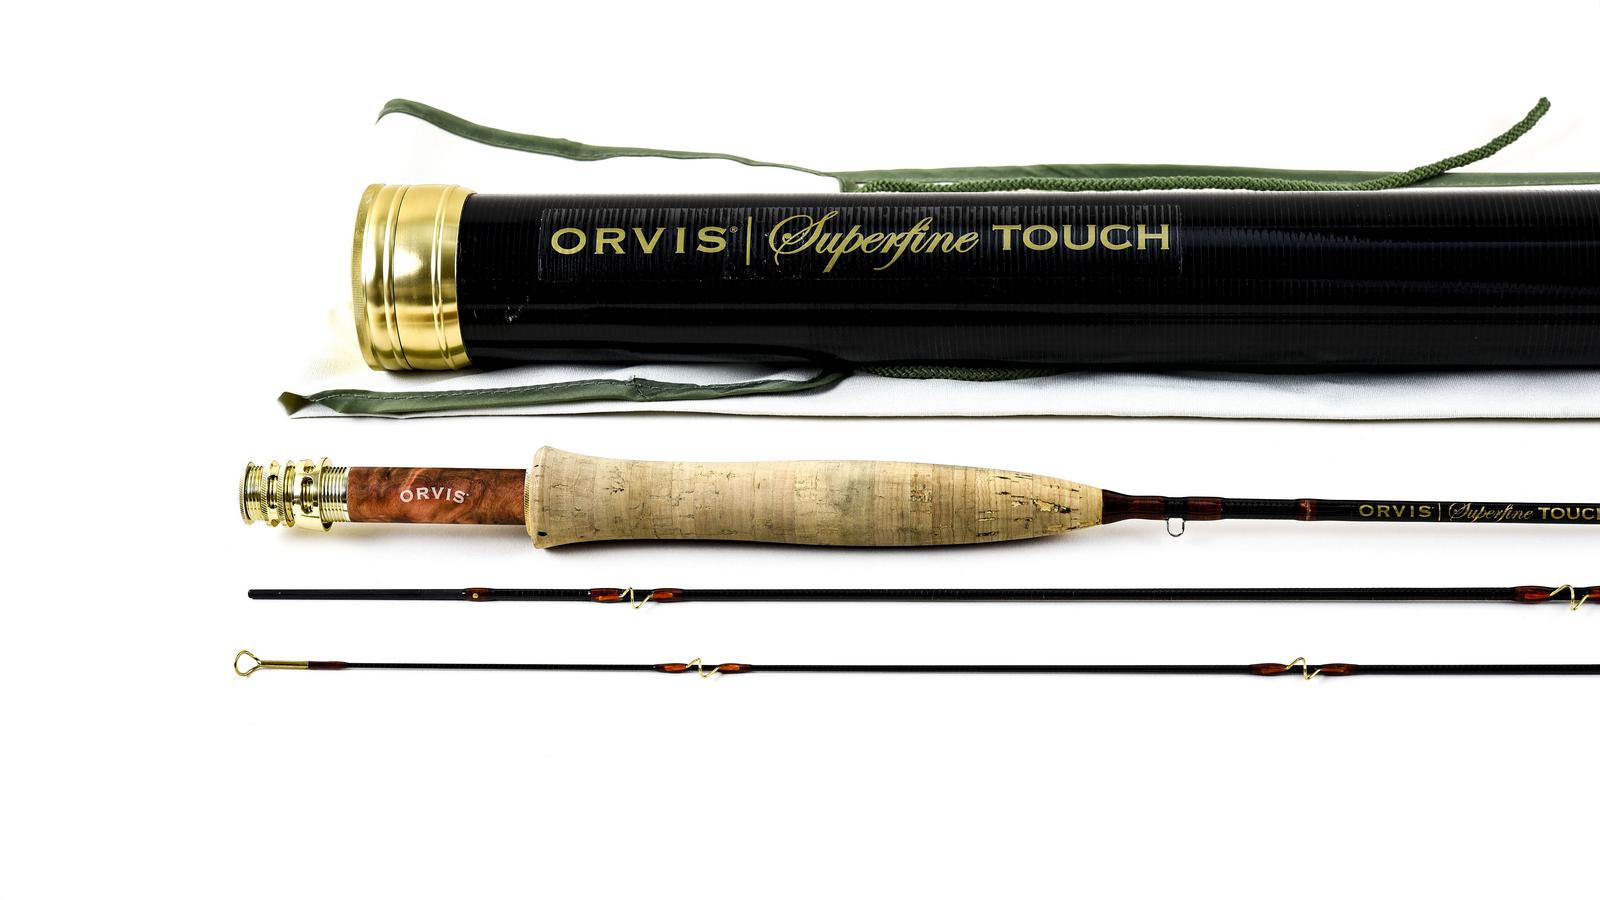 6' Orvis “Superfine Touch” Graphite Fly Rod